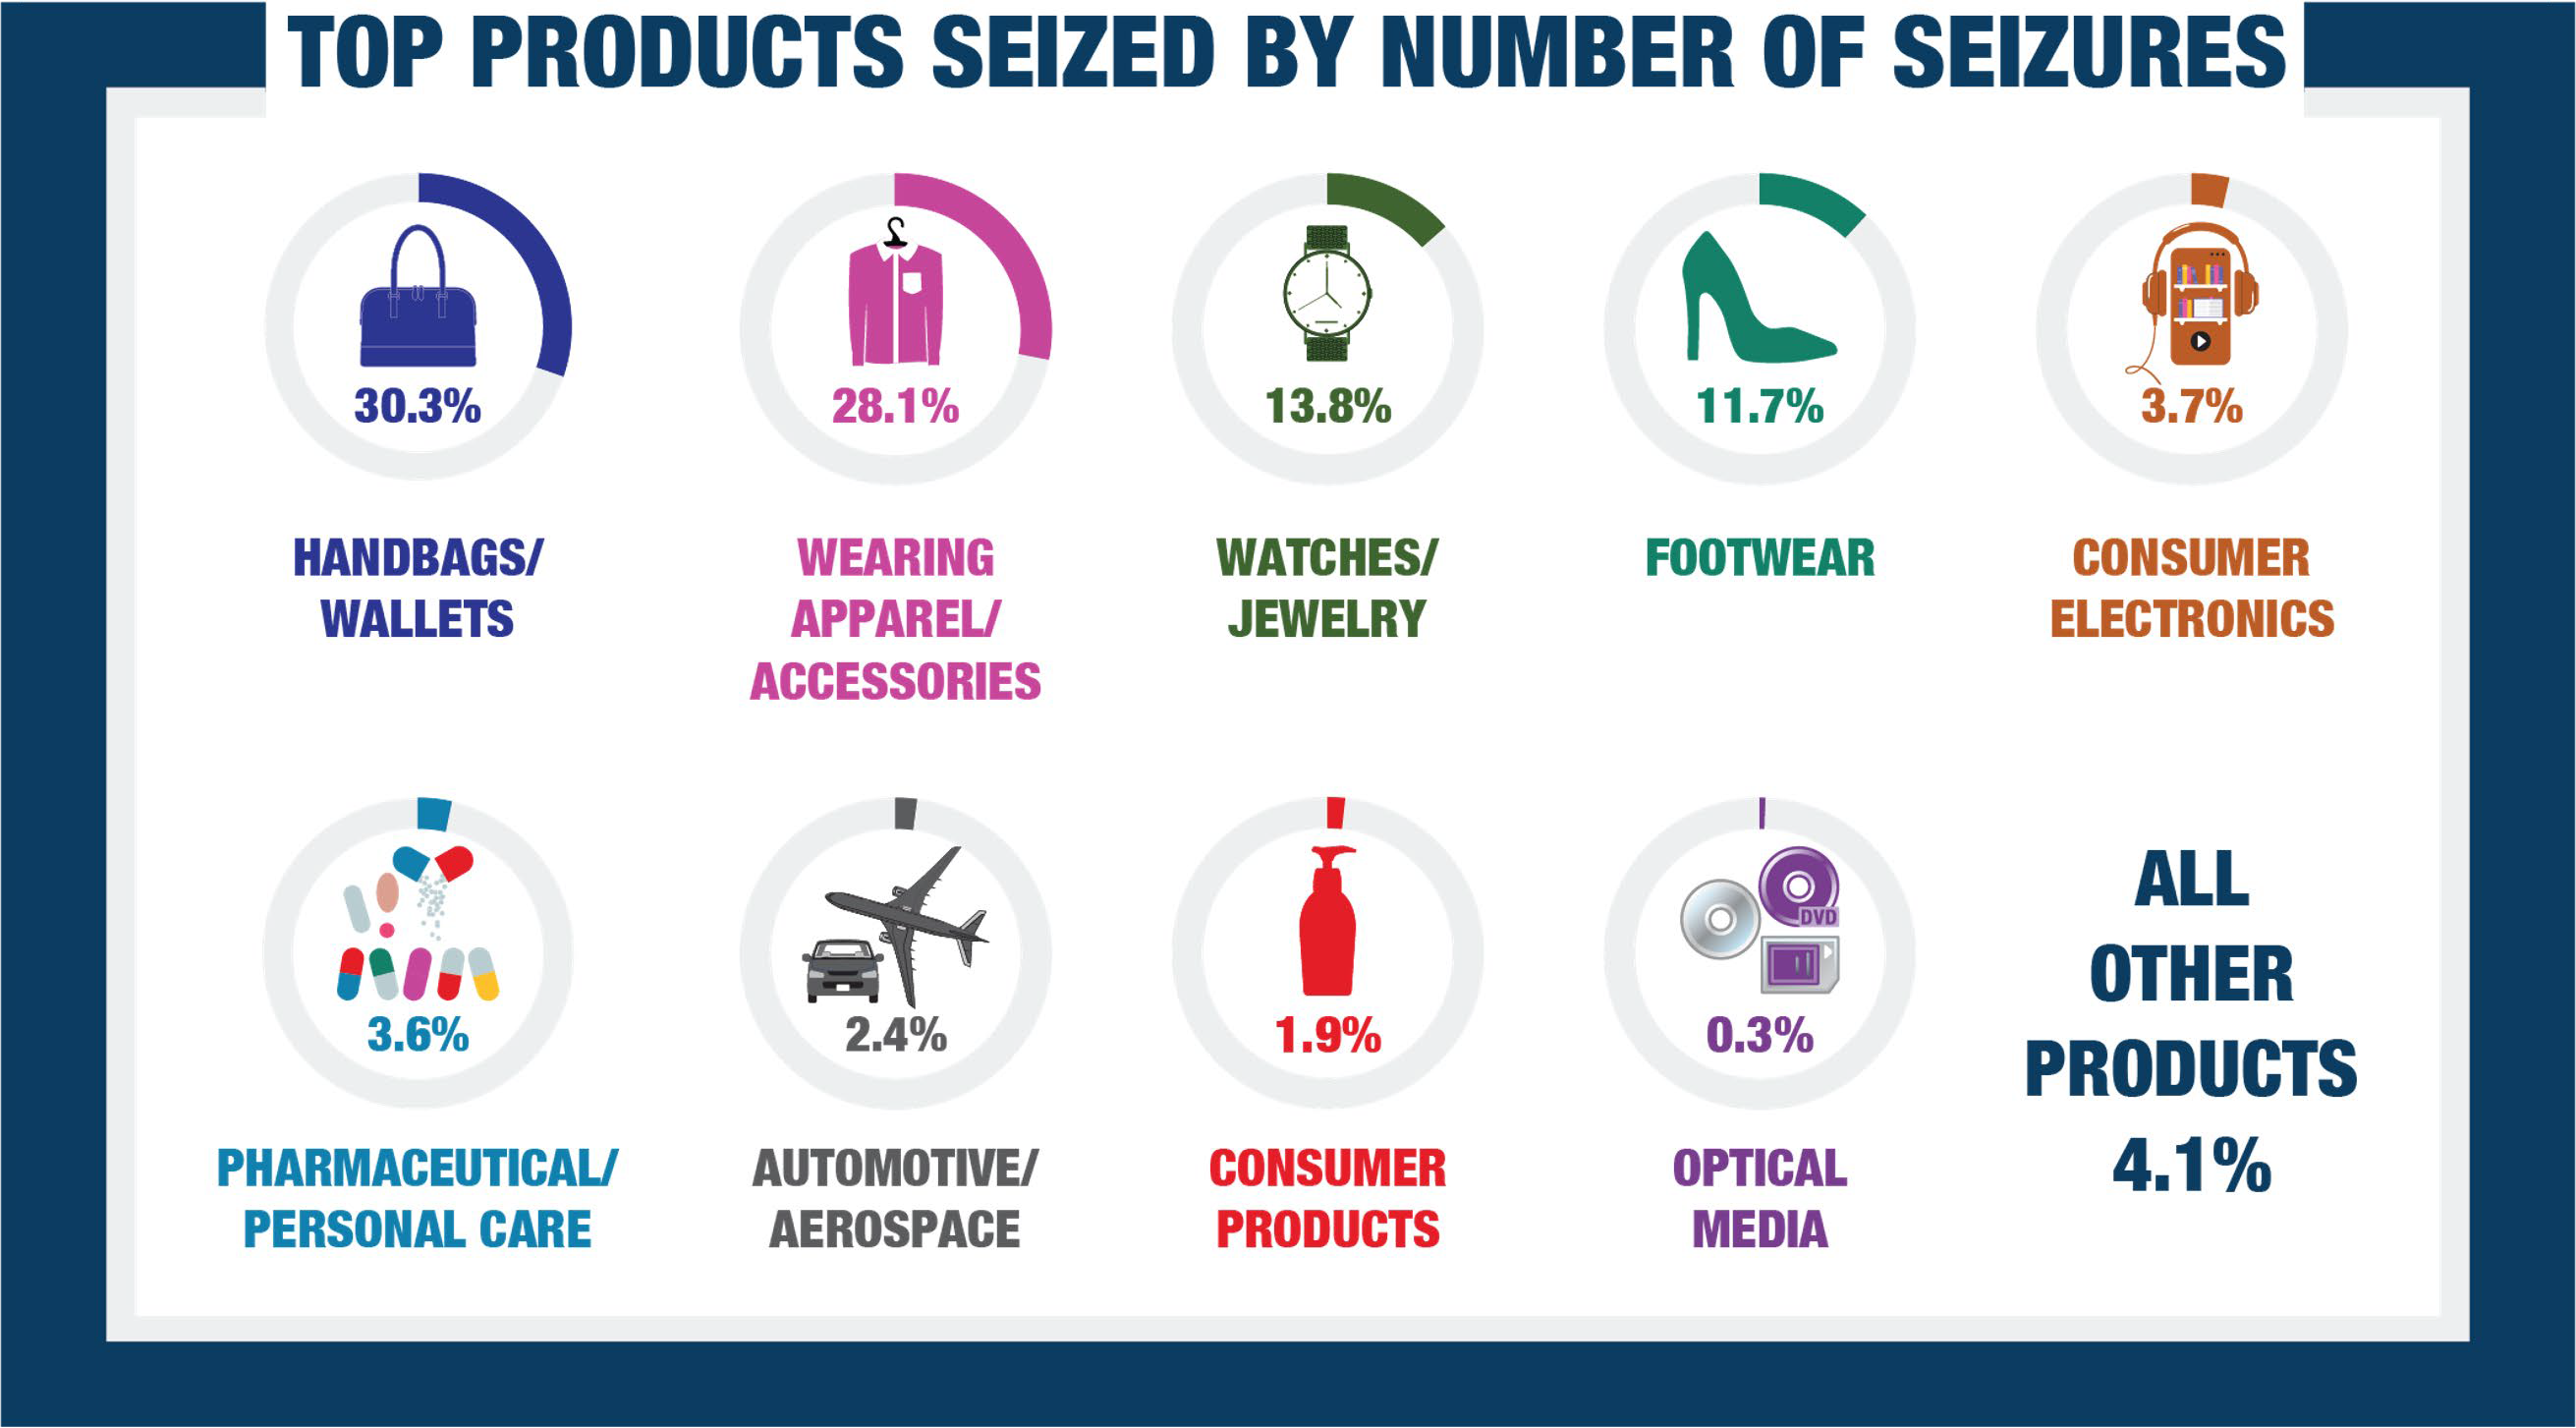 Table: Top Products Seized by Number of Seizure Lines. Handbags/Wallets: 30.3%; Wearing Apparel/Accessories: 28.1%; Watches/Jewelry: 13.8%; Footwear: 11.7%; Consumer Electronics: 3.7%; Pharmaceutical/Personal Care: 3.6%; Automotive/Aerospace 2.4%; Consumer Products: 1.9%; Optical Media: 0.3%, All Other Products: 4.1%. 